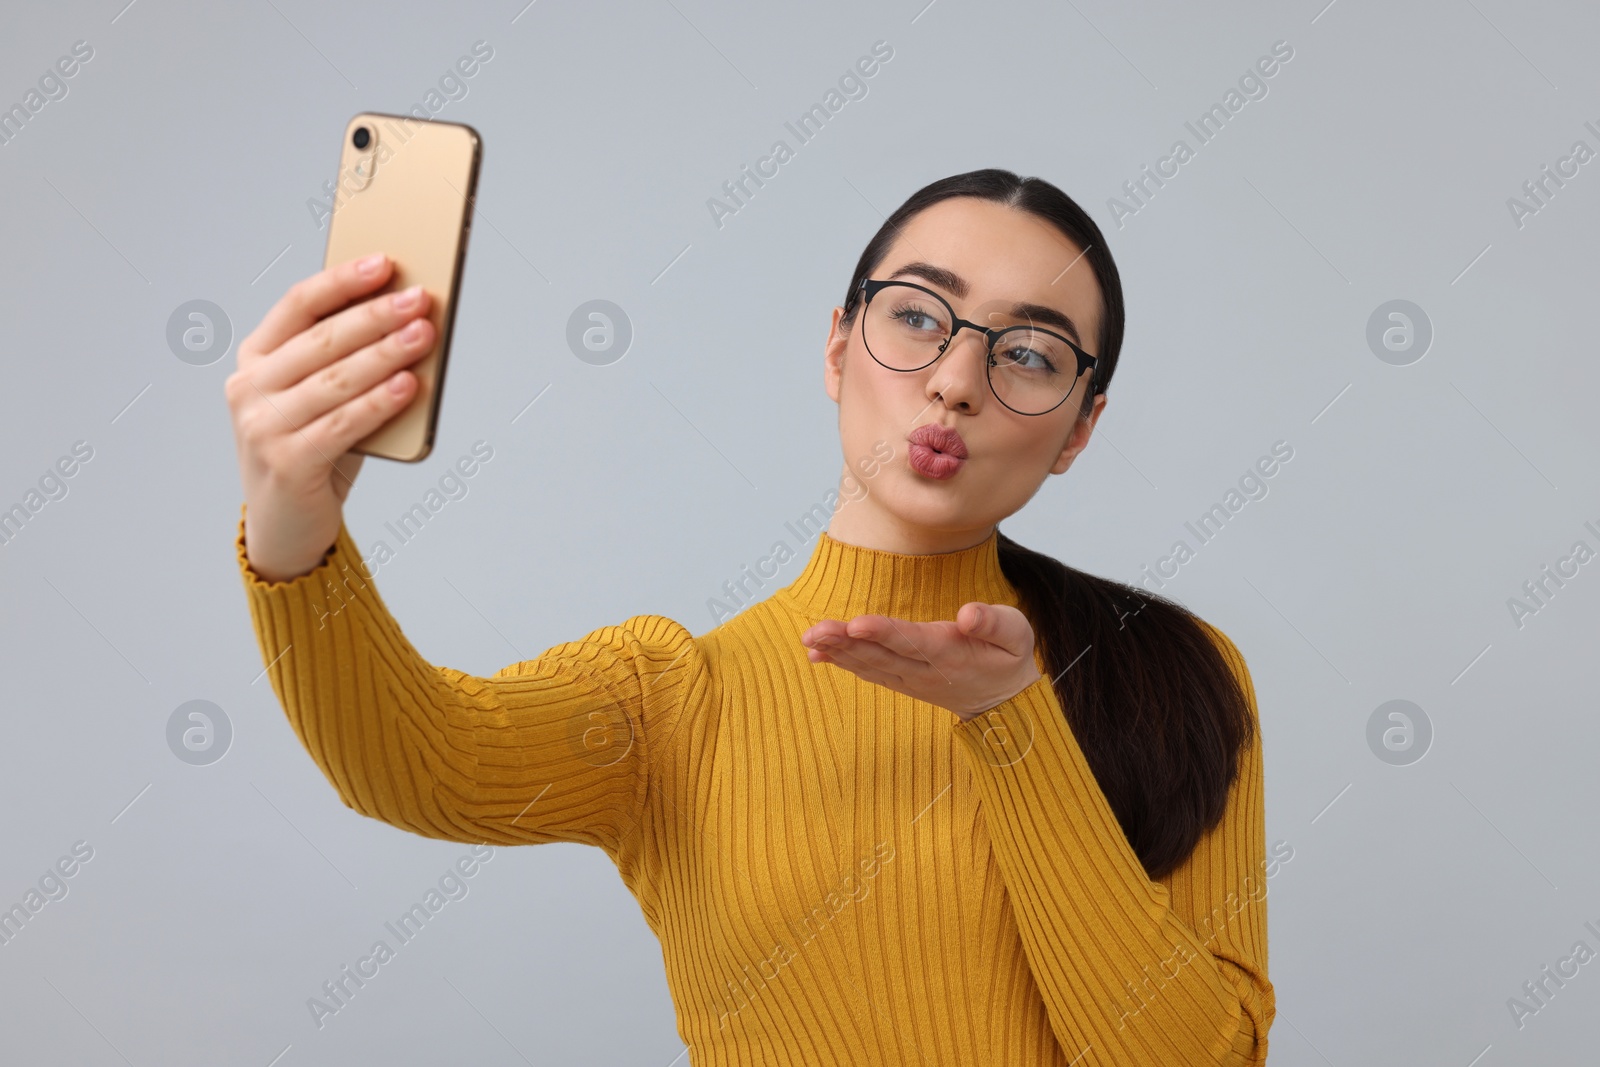 Photo of Young woman taking selfie with smartphone and blowing kiss on grey background